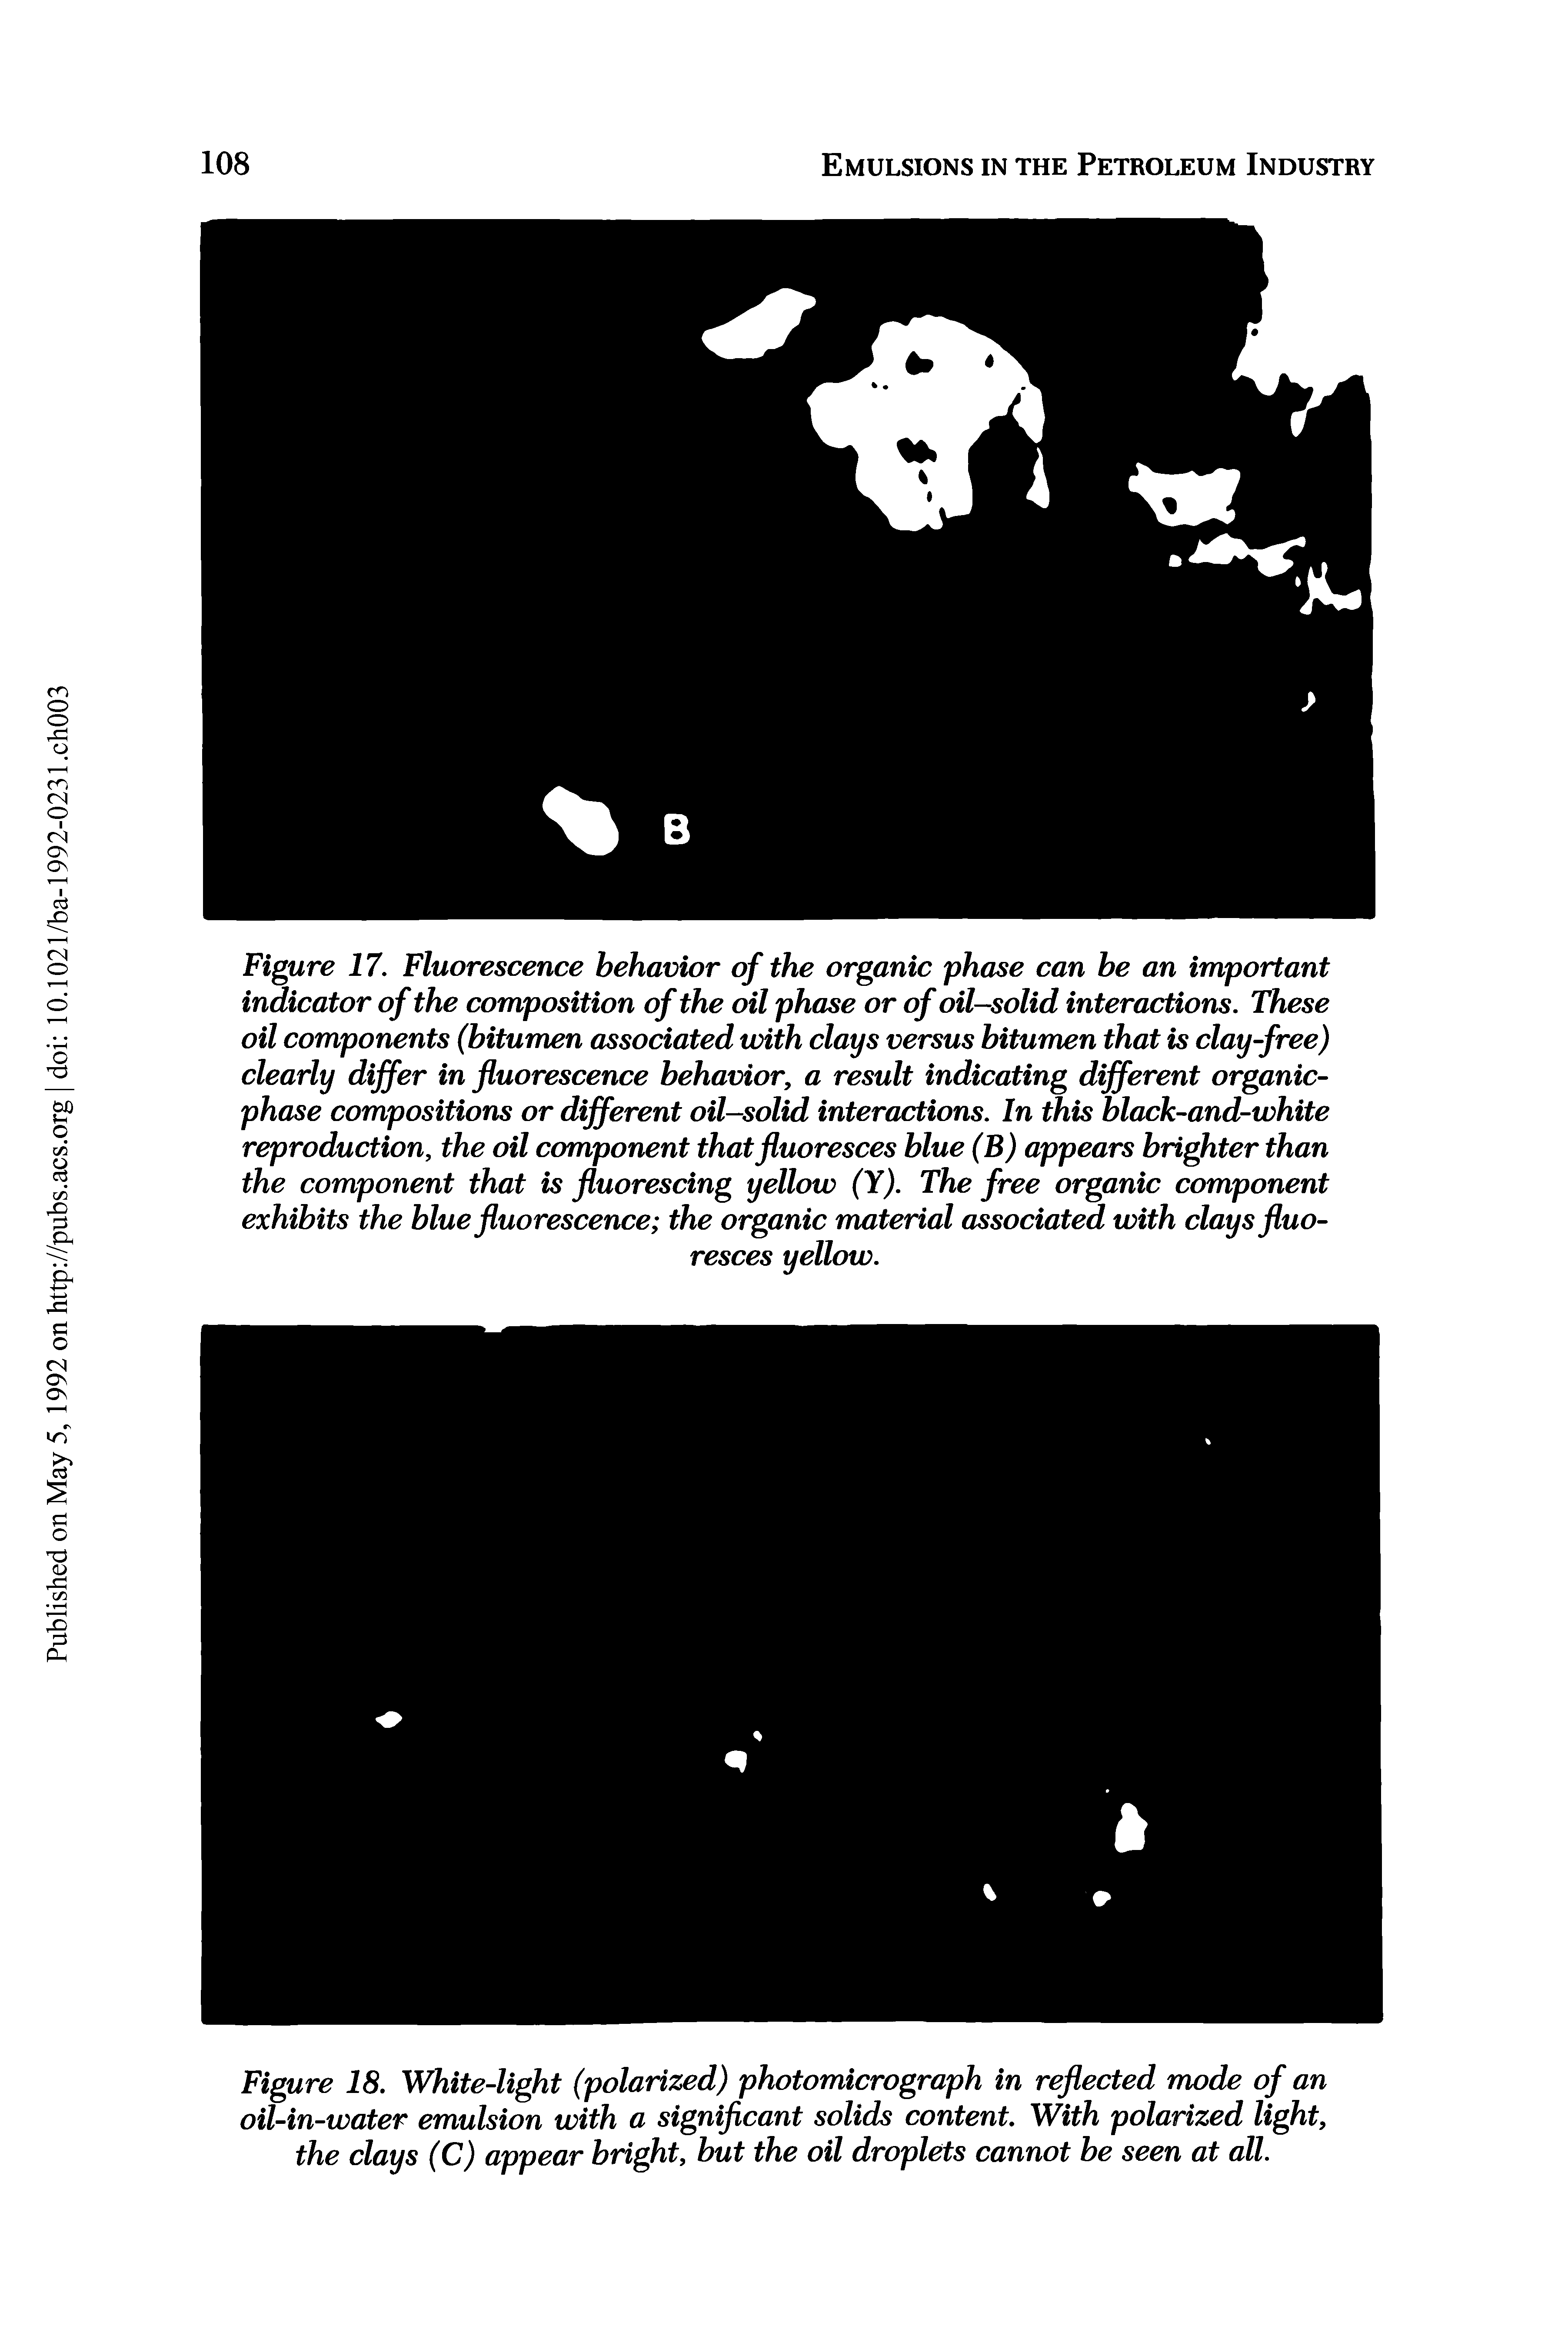 Figure 18. White-light (polarized) photomicrograph in reflected mode of an oil-in-water emulsion with a significant solids content. With polarized light, the clays (C) appear bright, but the oil droplets cannot be seen at all.